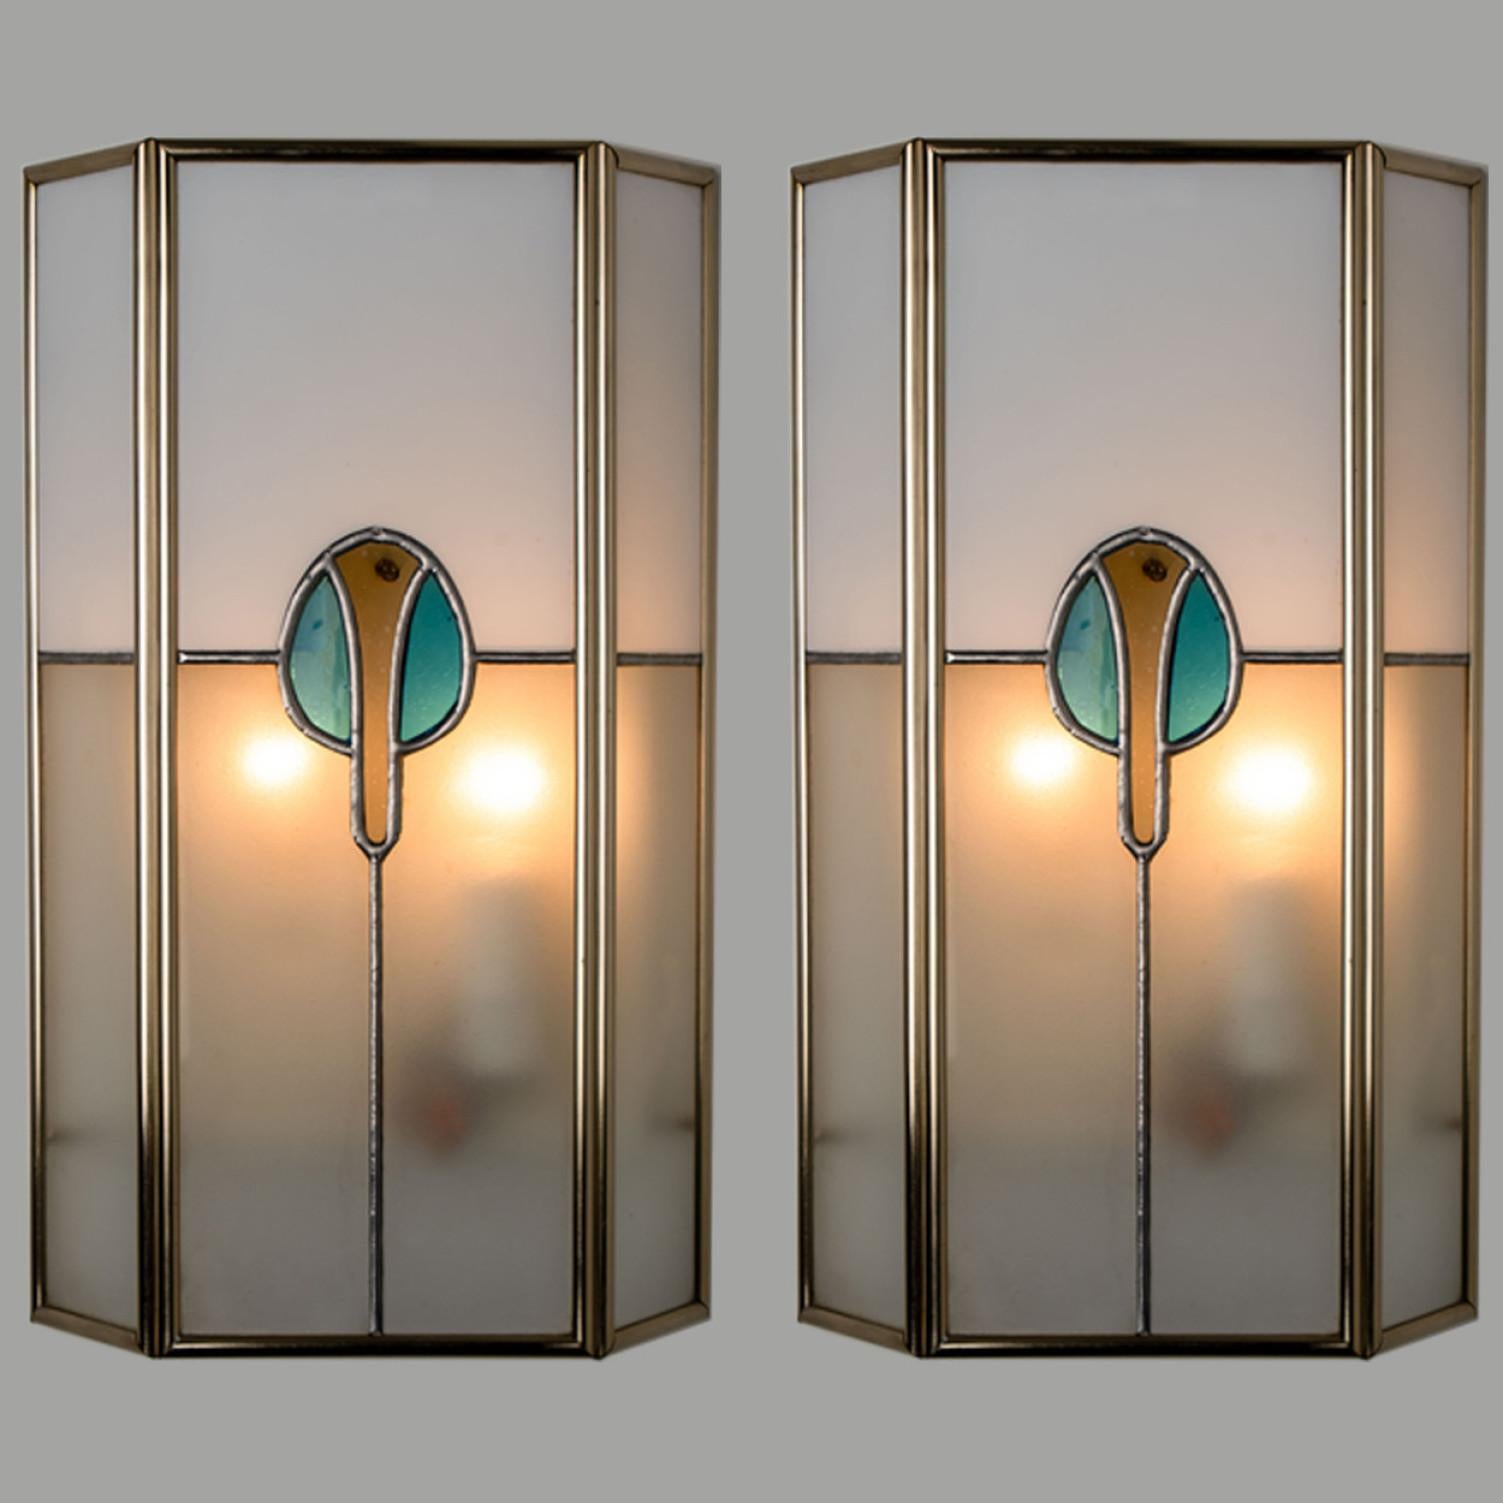 A pair of  Frosted stained wall lights. Manufactured by PoliArte, Italy in the 1970s.

Albano Poli founded Poliarte in 1968 as an innovative and experimental lighting company.

His typical style was combining stainless steel or raw metal to modular